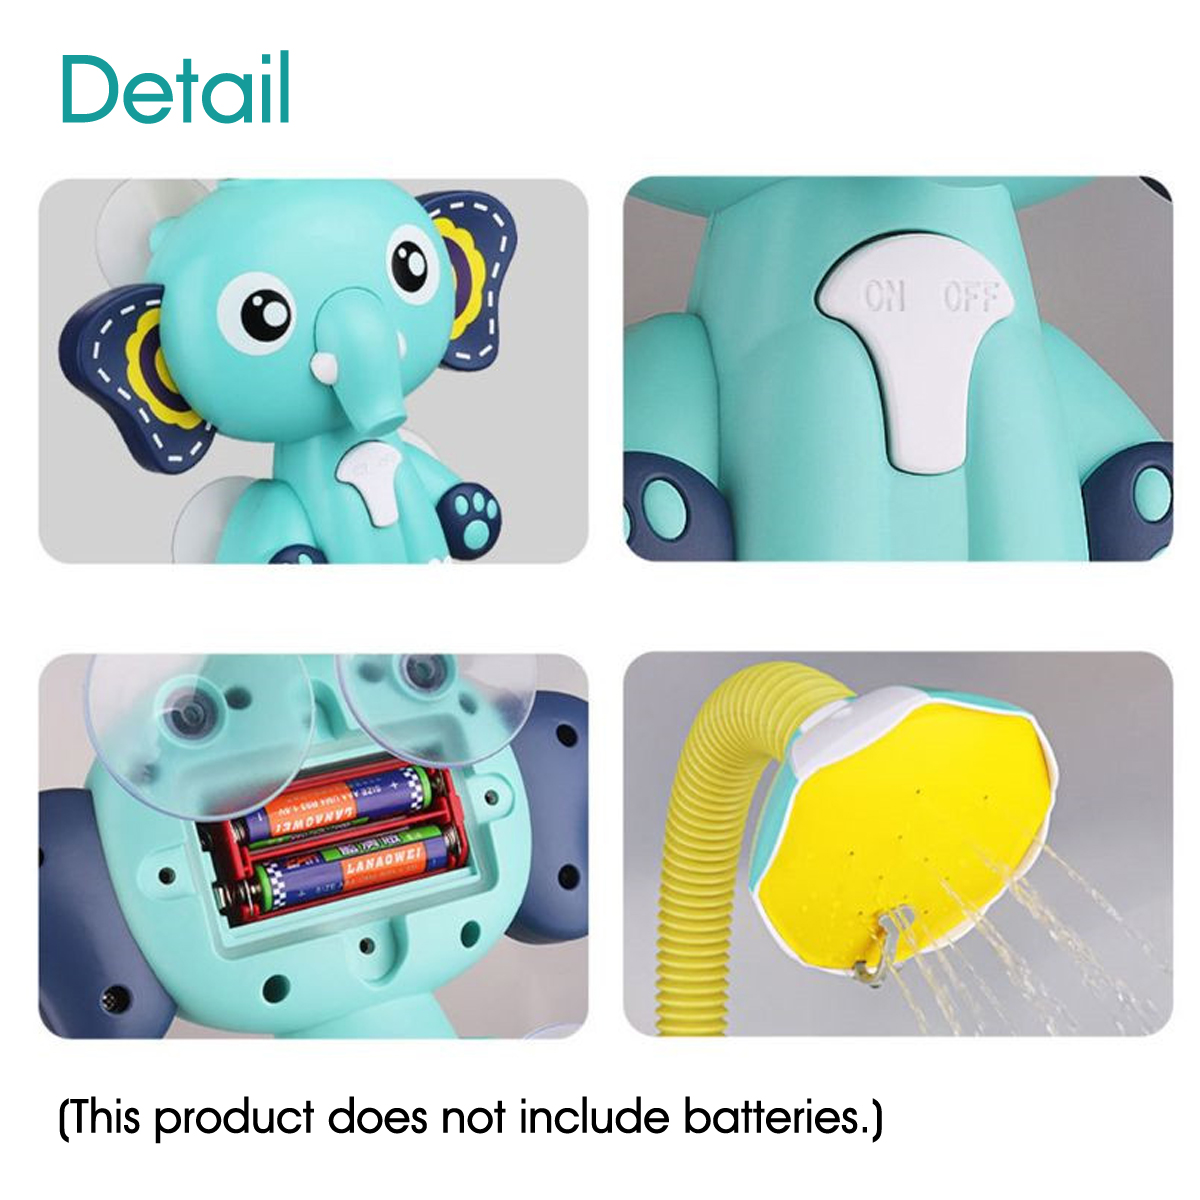 Electric-Elephant-Faucet-Shower-Water-Spray-Baby-Bath-Toy-Two-Water-Outlet-Modes-for-Kids-Swimming-B-1716355-12